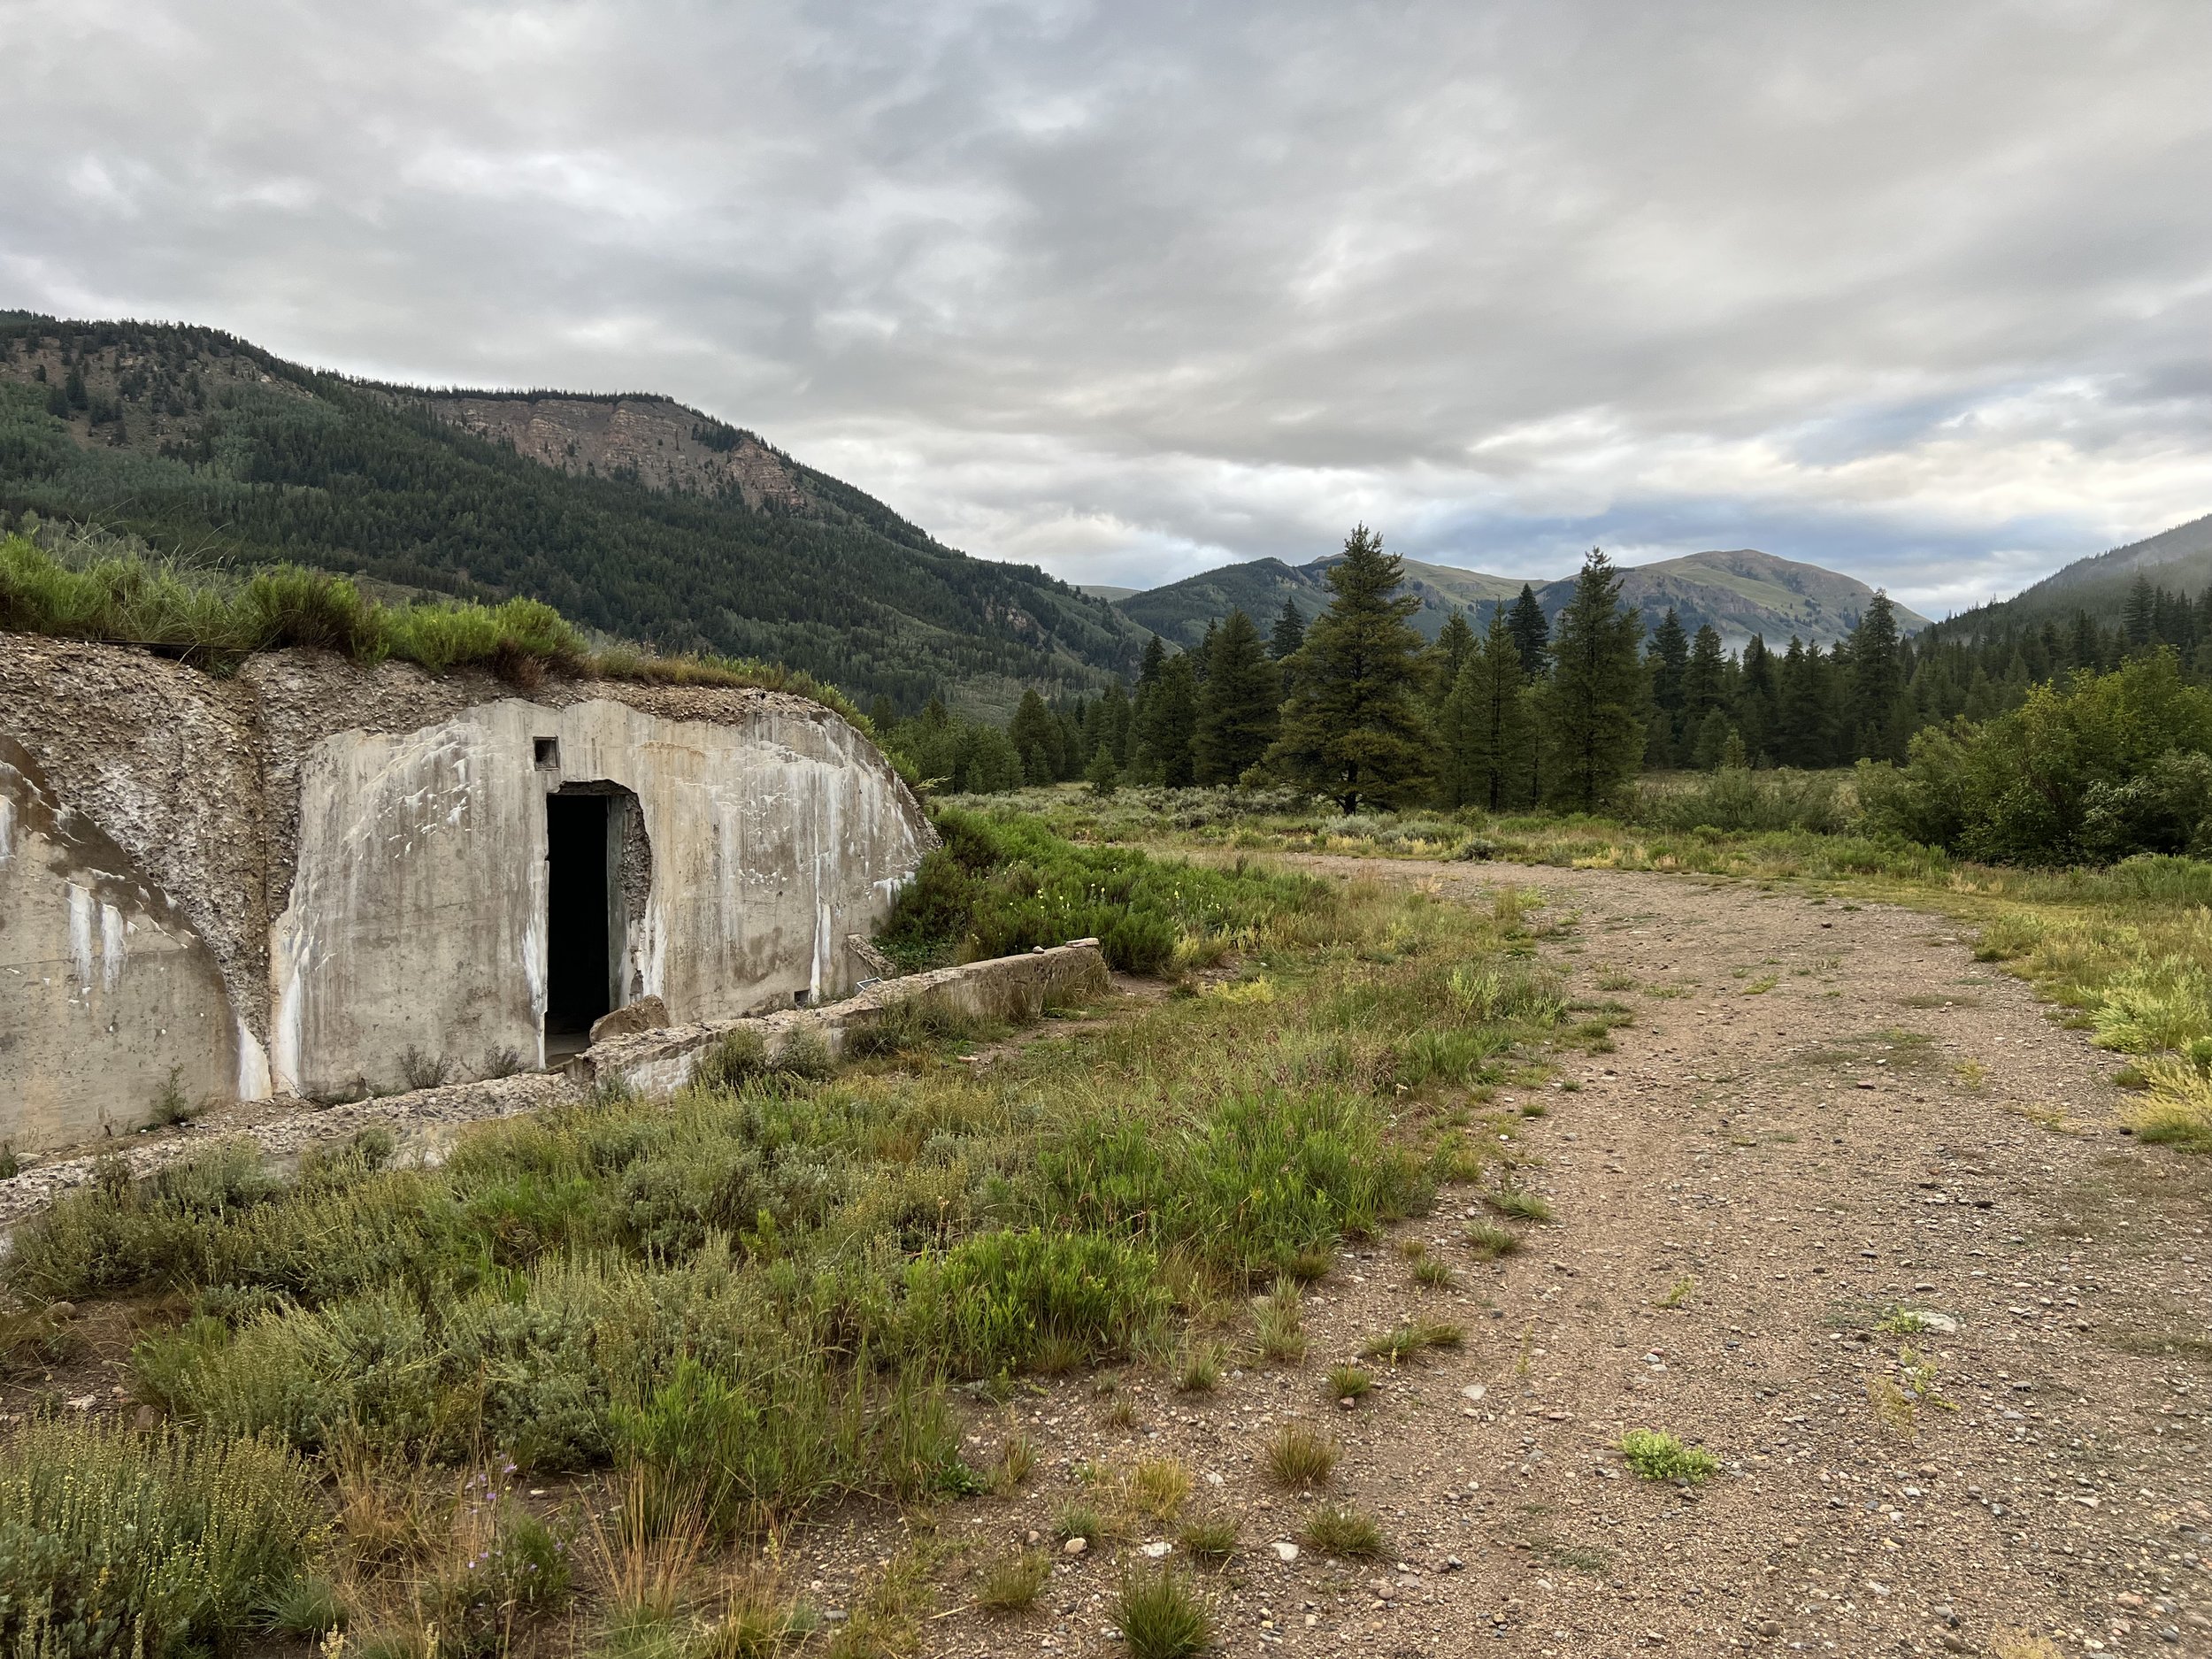   Camp Hale bunkers.  